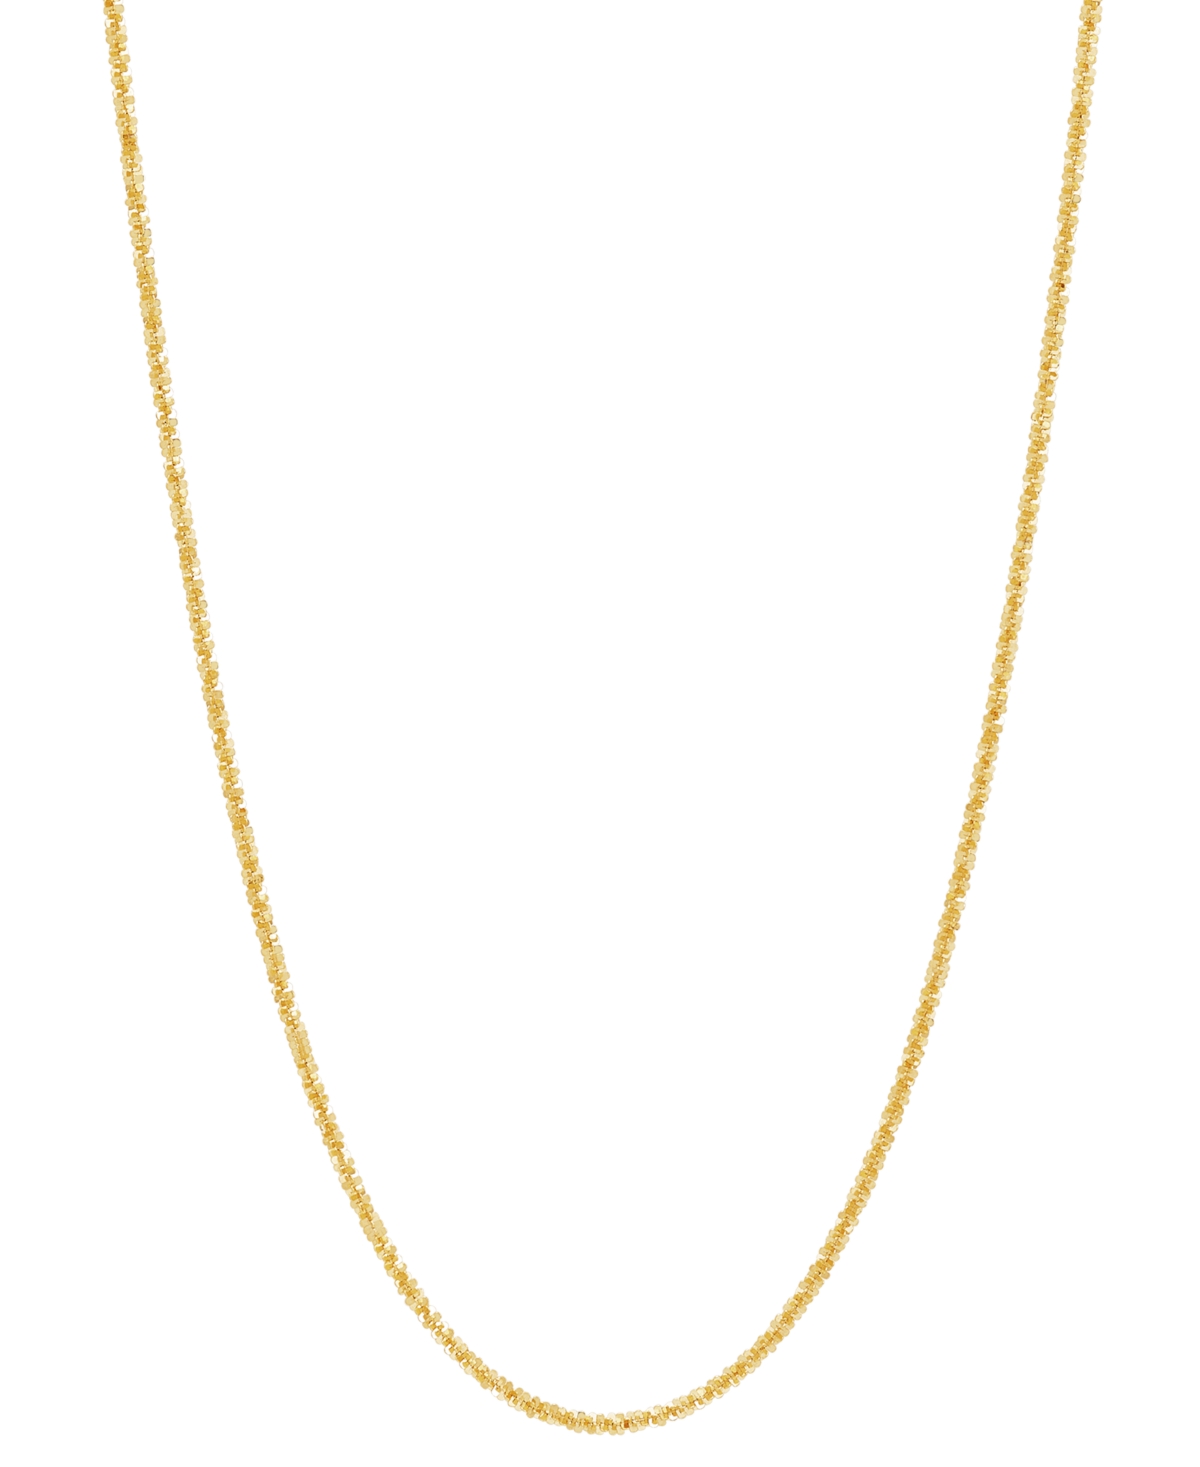 Italian Gold Crisscross Link 18" Chain Necklace In 14k Gold In Yellow Gold